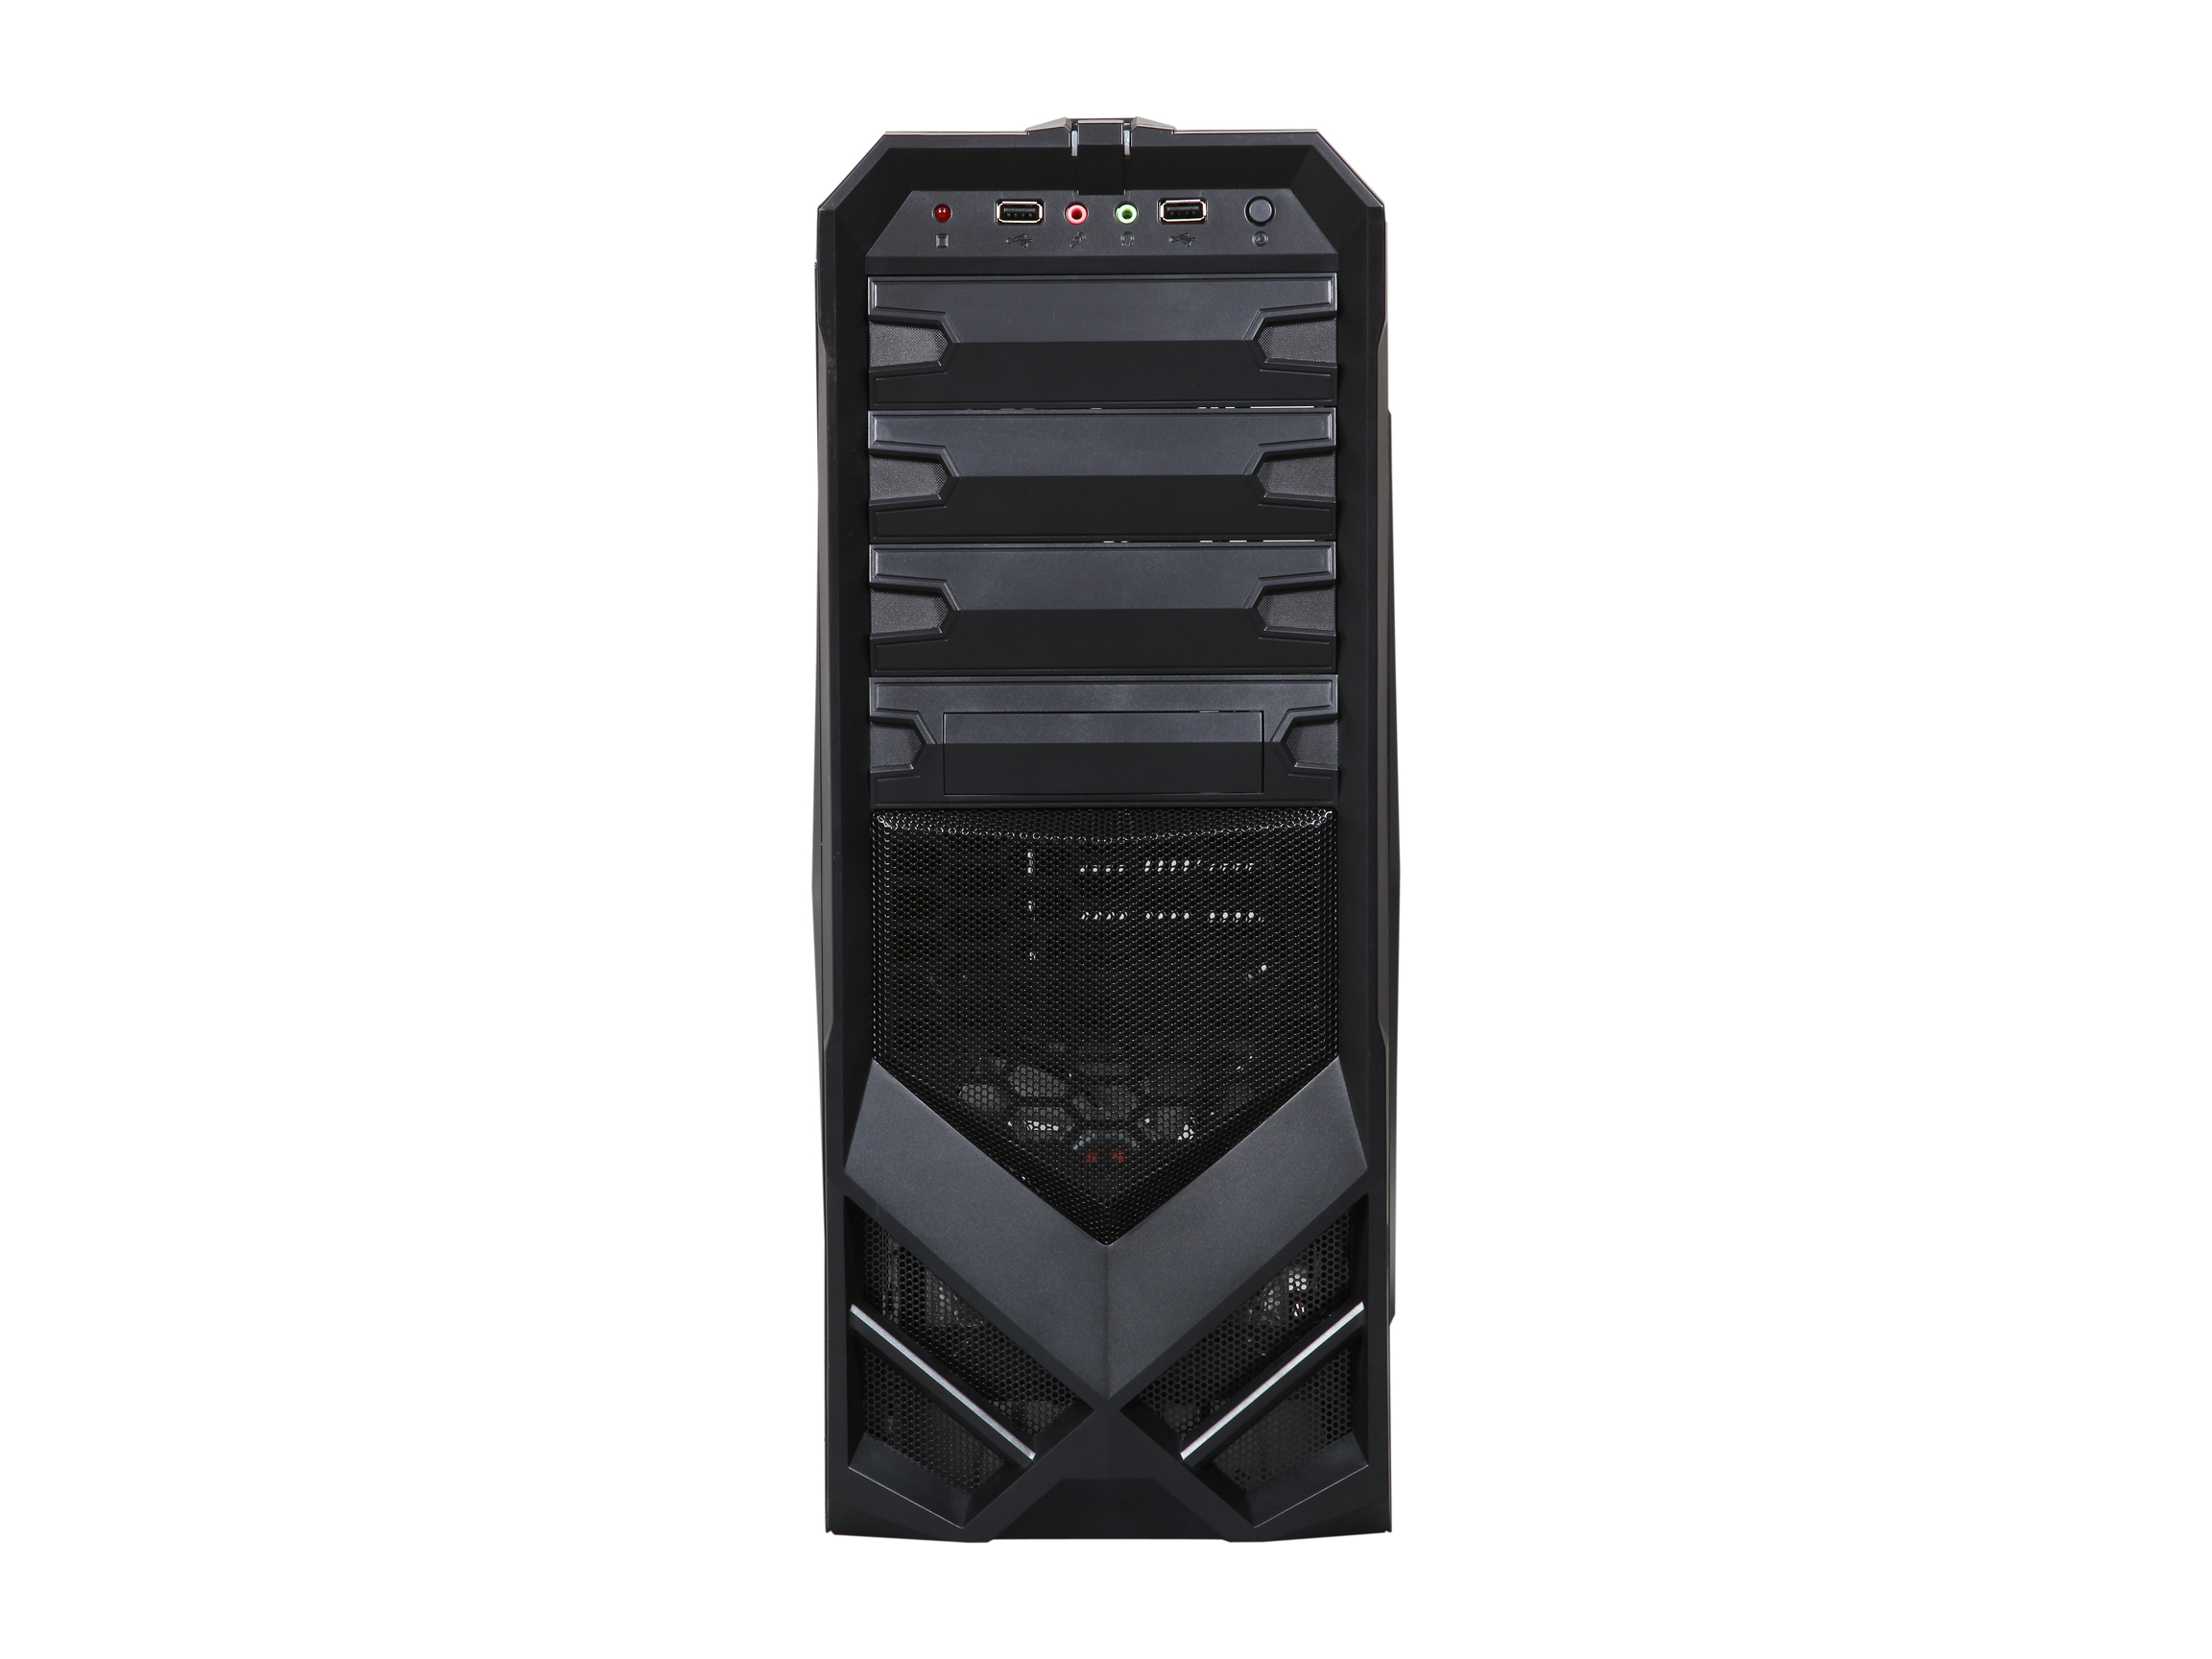 Rosewill Galaxy 01 A ATX Mid Tower Black Gaming Computer Case